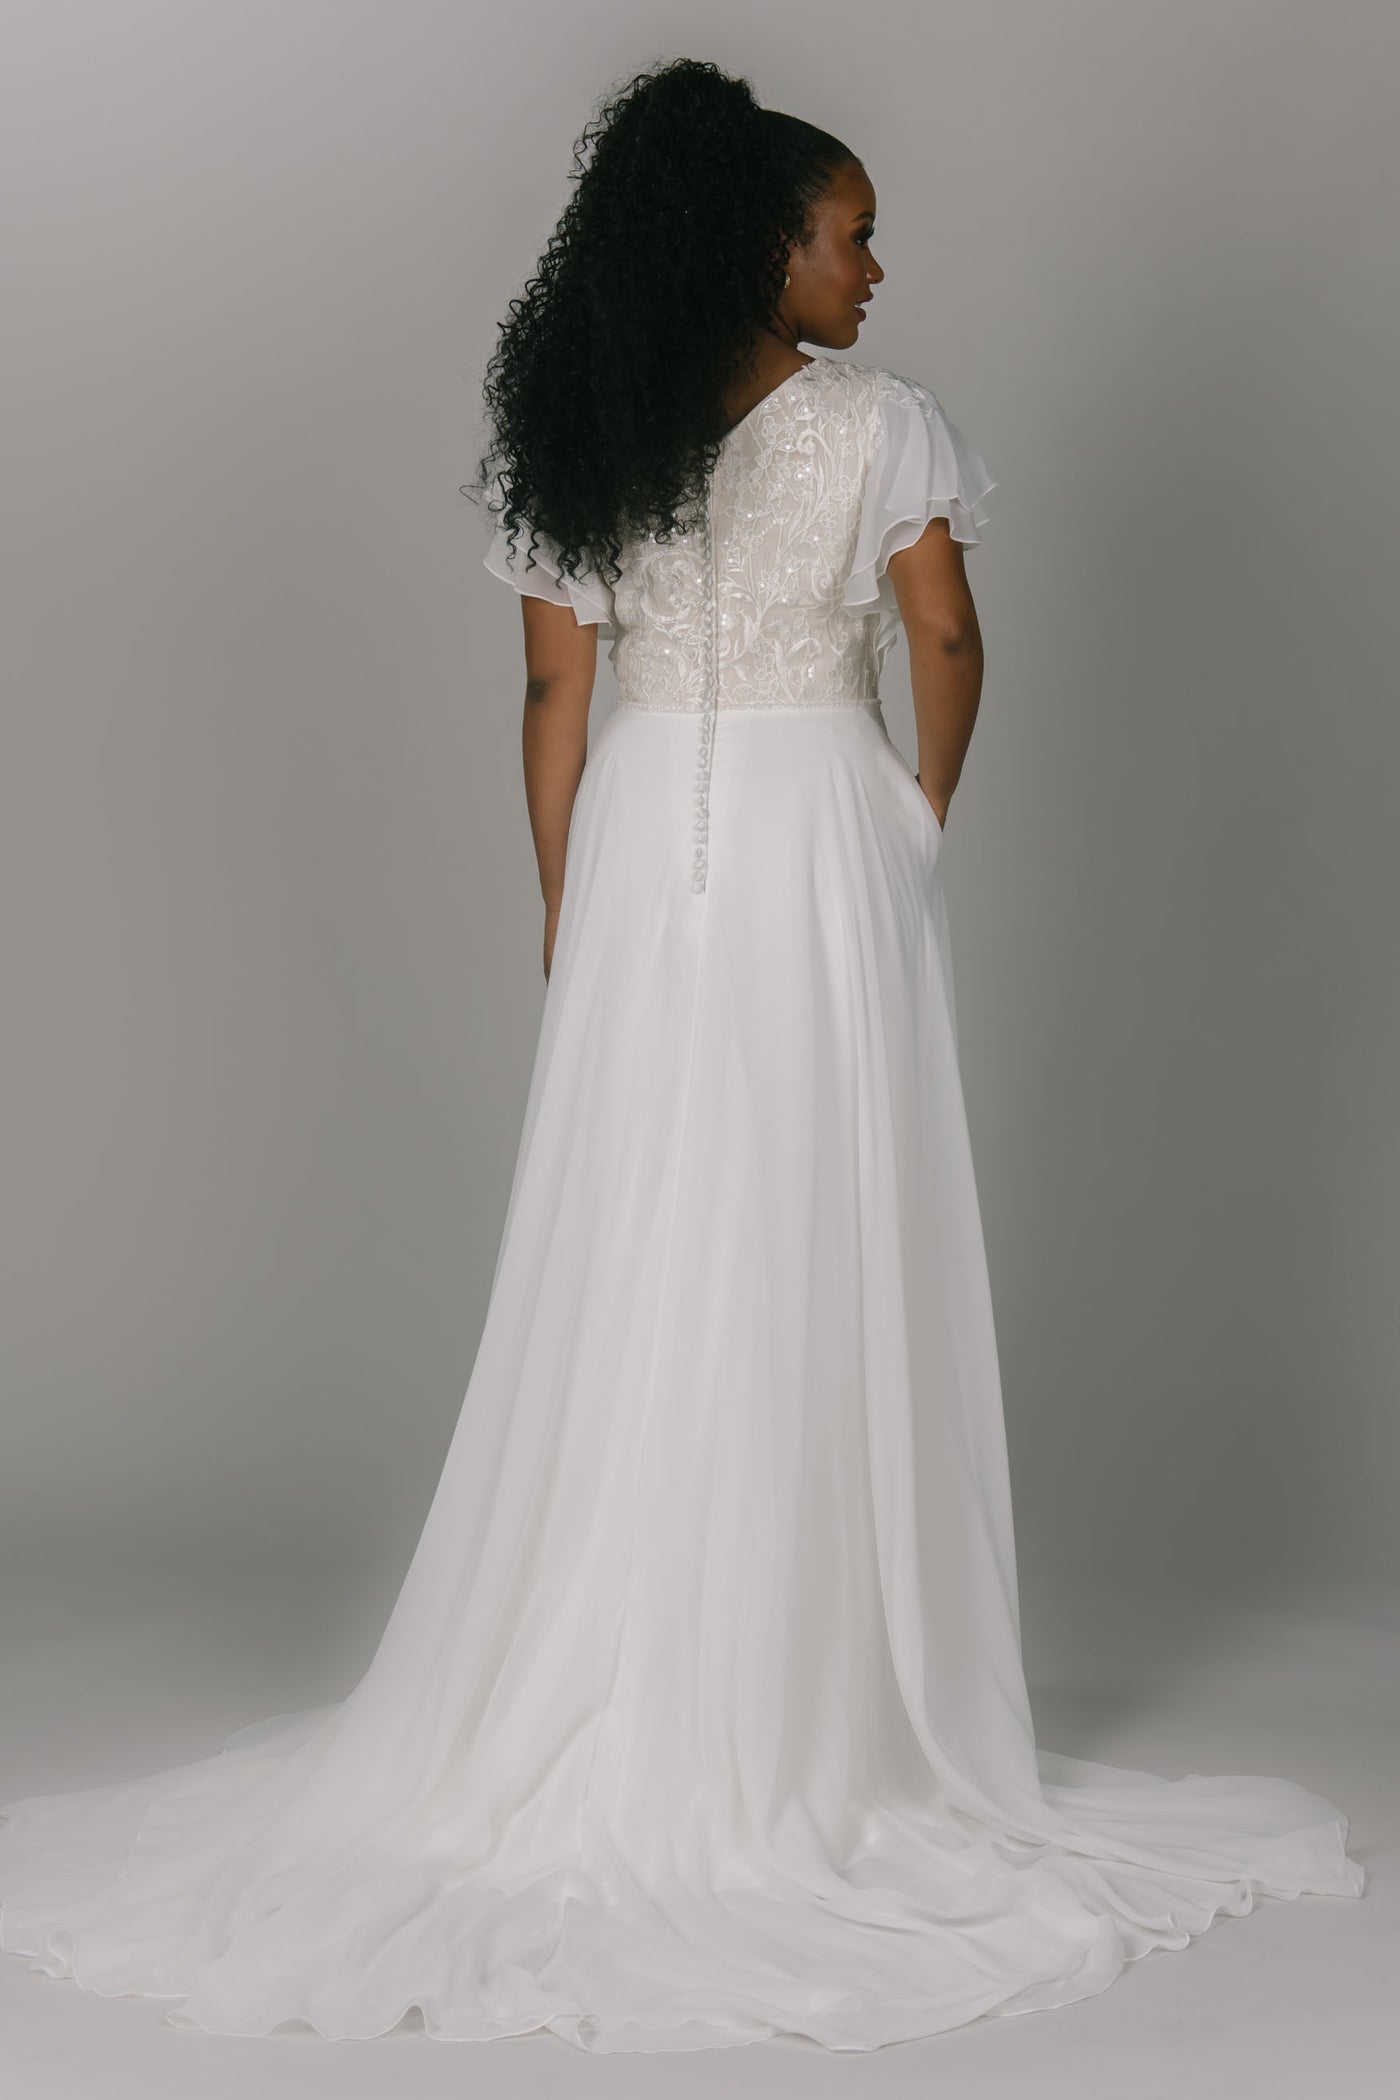 Modest wedding dress with flutter sleeves. It has a v-neckline and an a-line shape. The bottom is a flowy chiffon with a slit. The top is beaded lace. It has covered buttons down the back.